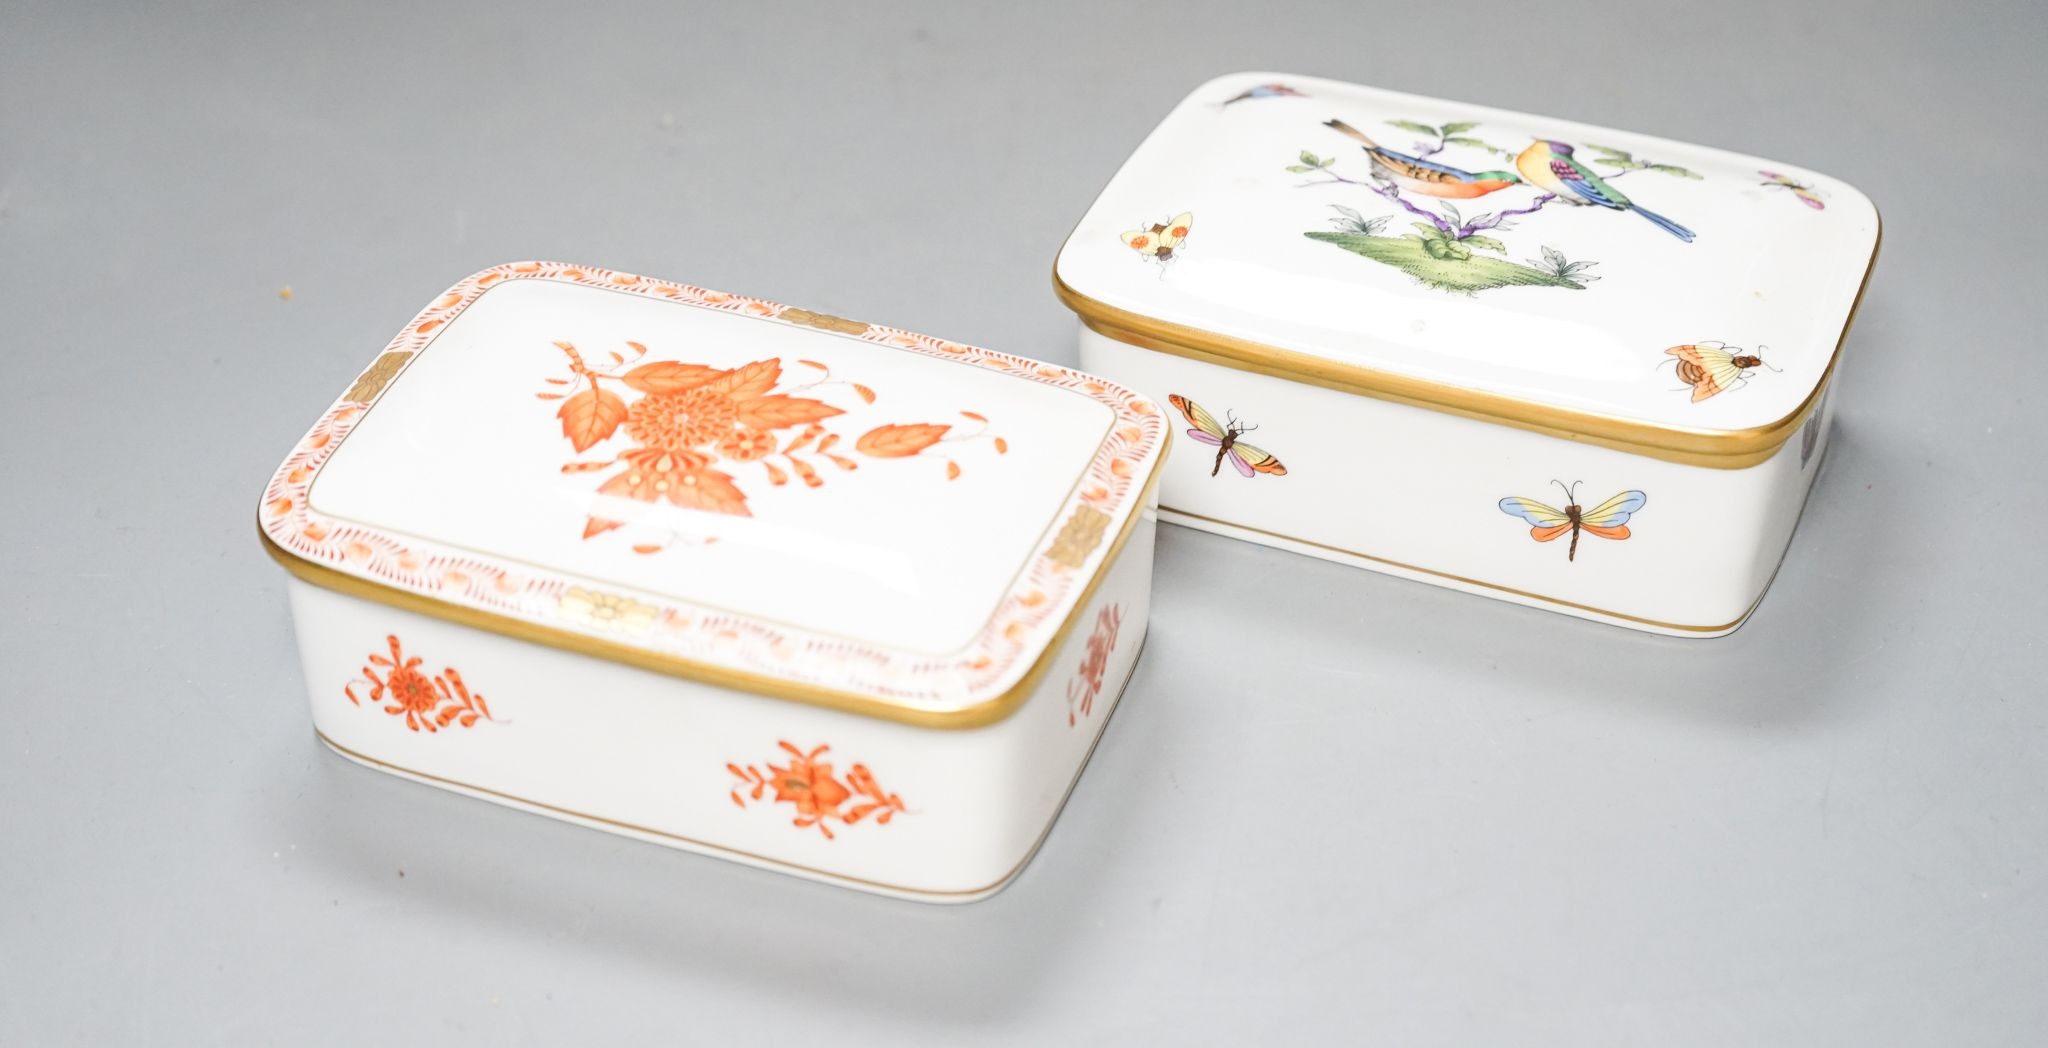 Two Herend Porcelain boxes and covers, 14 x 9.5cm